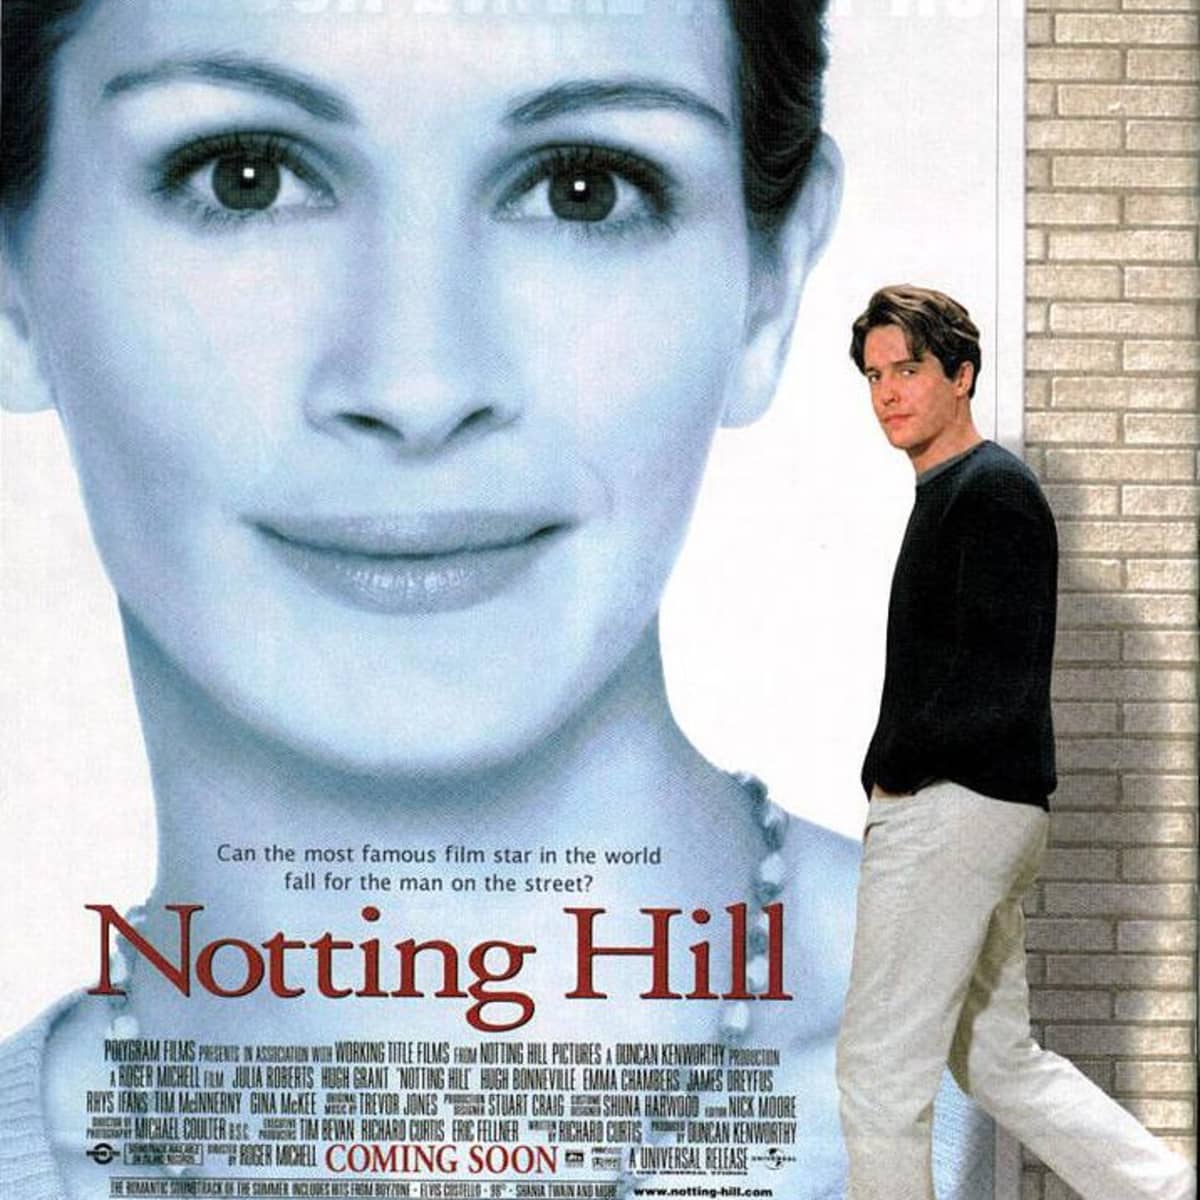 Notting Hill (1999) Review - Shat the Movies Podcast